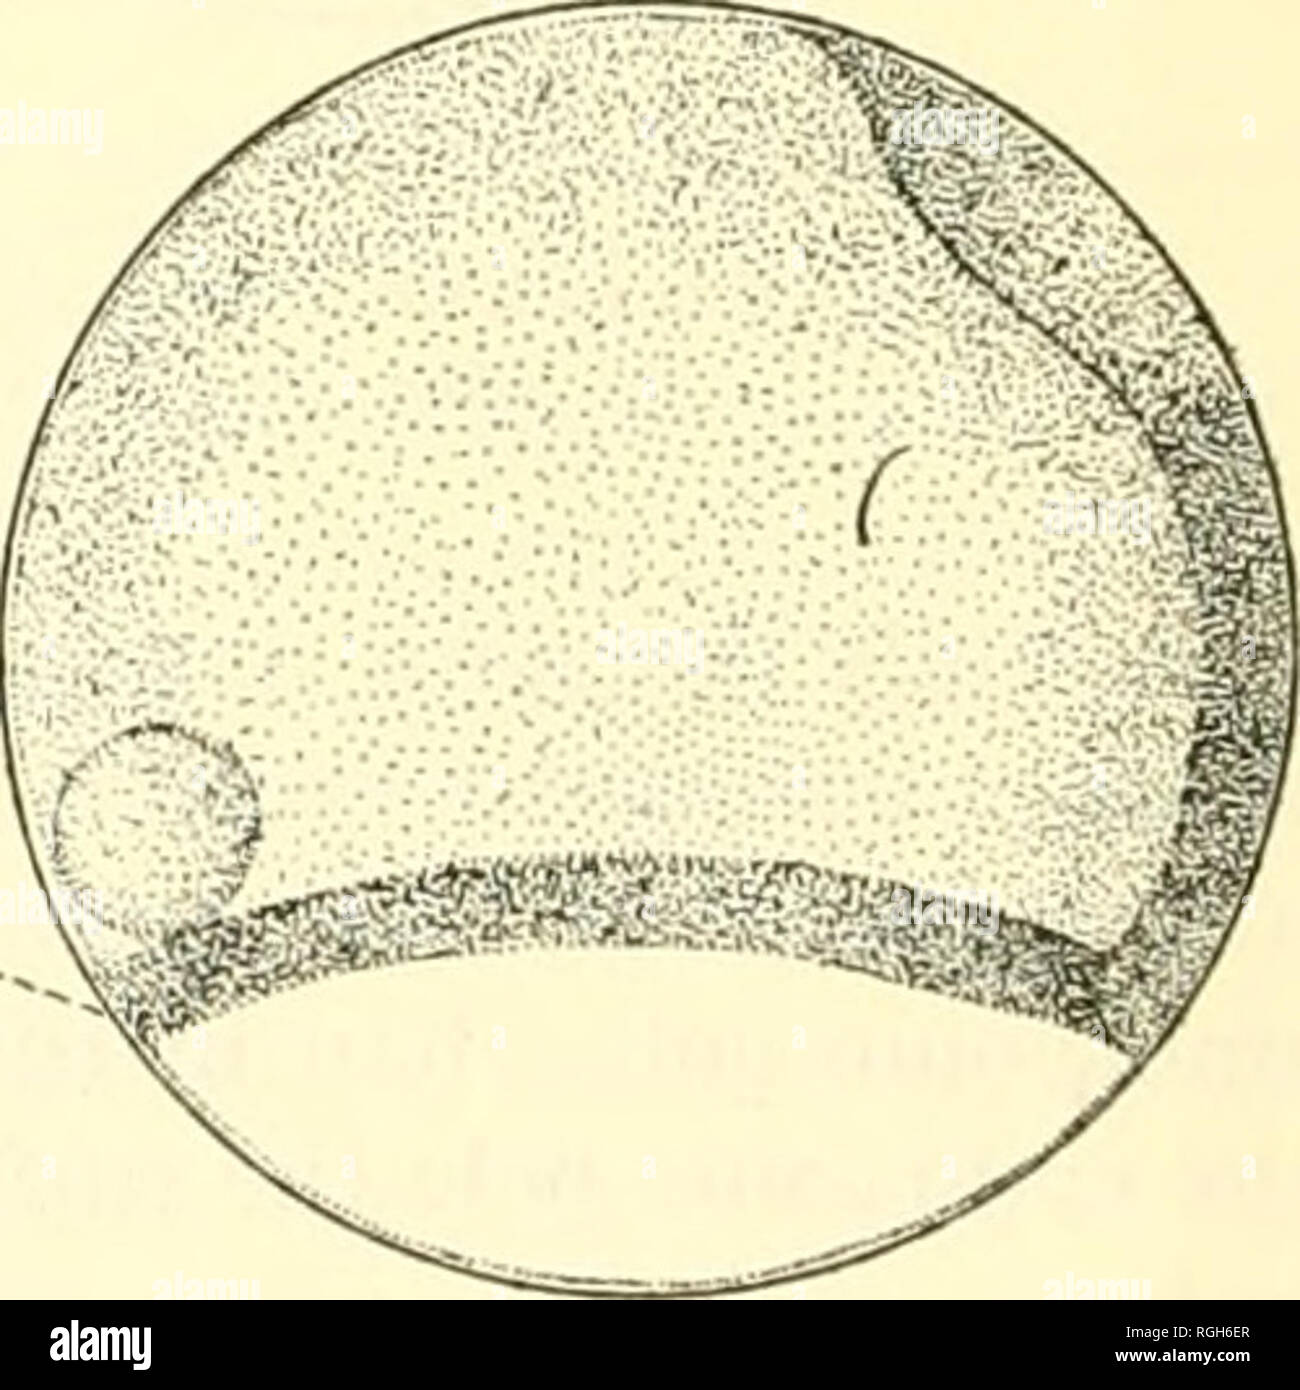 . Bulletin of the Bureau of Fisheries. Fisheries; Fish culture. BAIRDIELLA CFIRYSURA. Fig. 9.—Egg showing later stage in differentia- tion of embryonic shield; qt, germ ring; es, embryonic shield. Fig. 10.—Egg showing embryonic shield (fs) with embryonic area i,ea) outlined; eea, extra-embry- onic area; gr, germ ring; i&gt;p, posterior pole of blastoderm. outlined it is somewhat broader in the anterior or head region than in the posterior region. Observed in surface view (fig. 10) the embryonic area now has a more or less regular spatulate form. While the embryonic shield is growing forward in Stock Photo